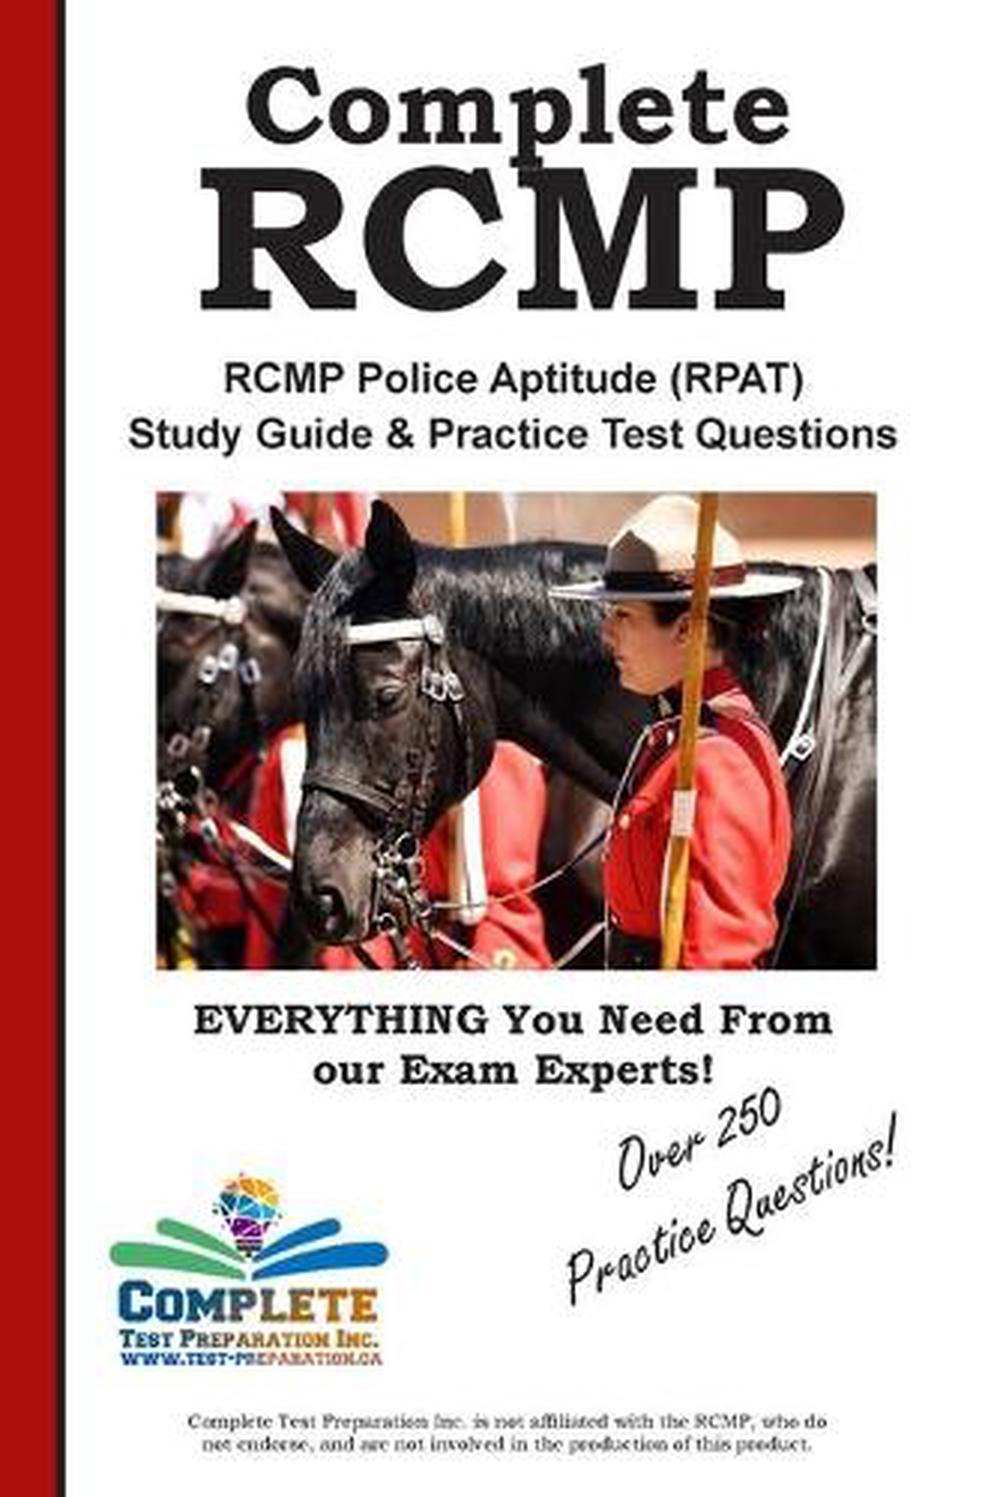 complete-rcmp-rcmp-police-aptitude-rpat-study-guide-practice-test-questions-9781772450668